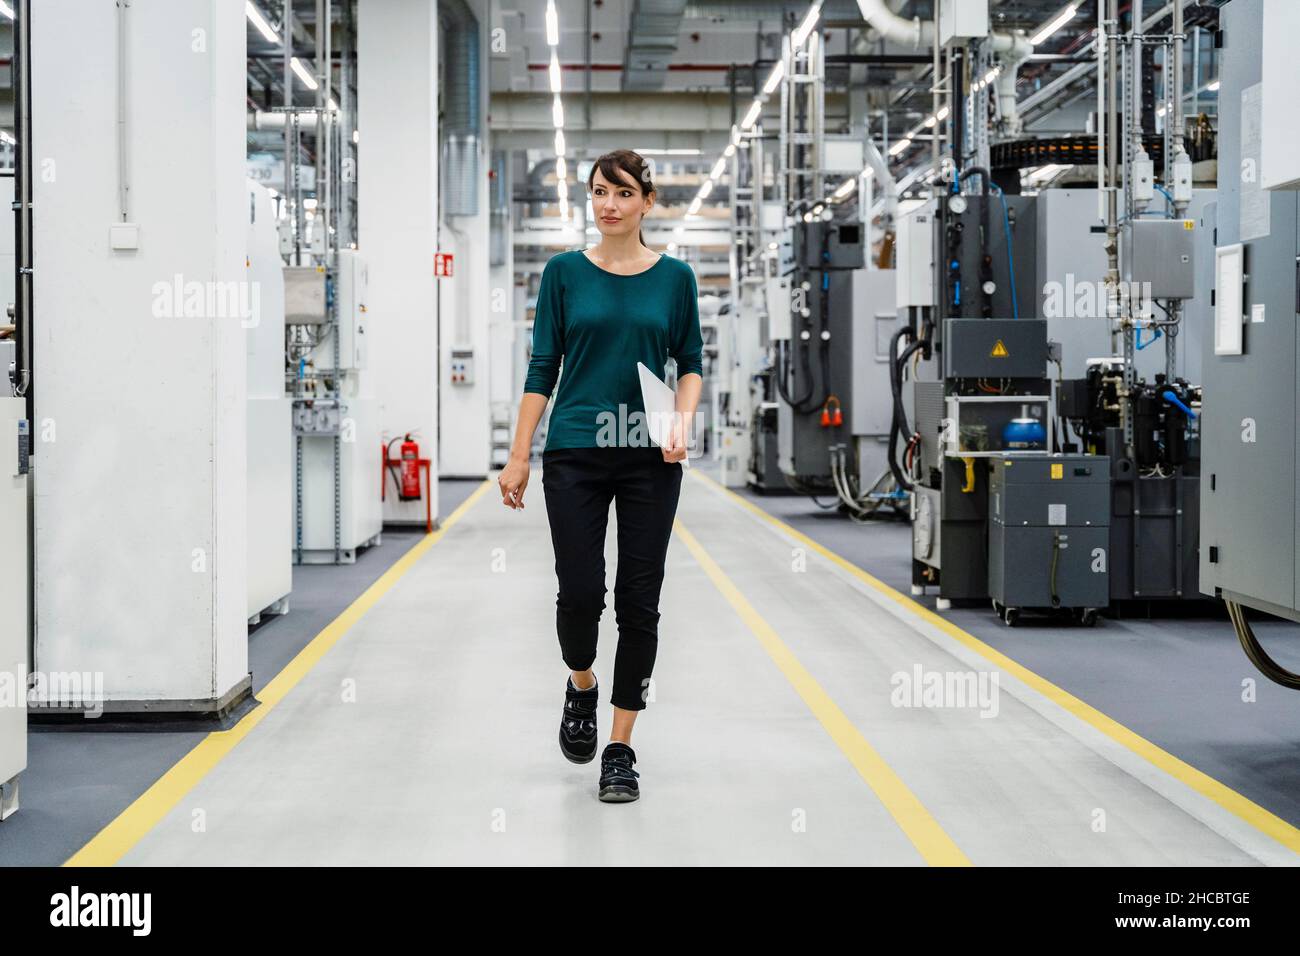 Businesswoman with tablet PC walking amidst industrial equipment Stock Photo